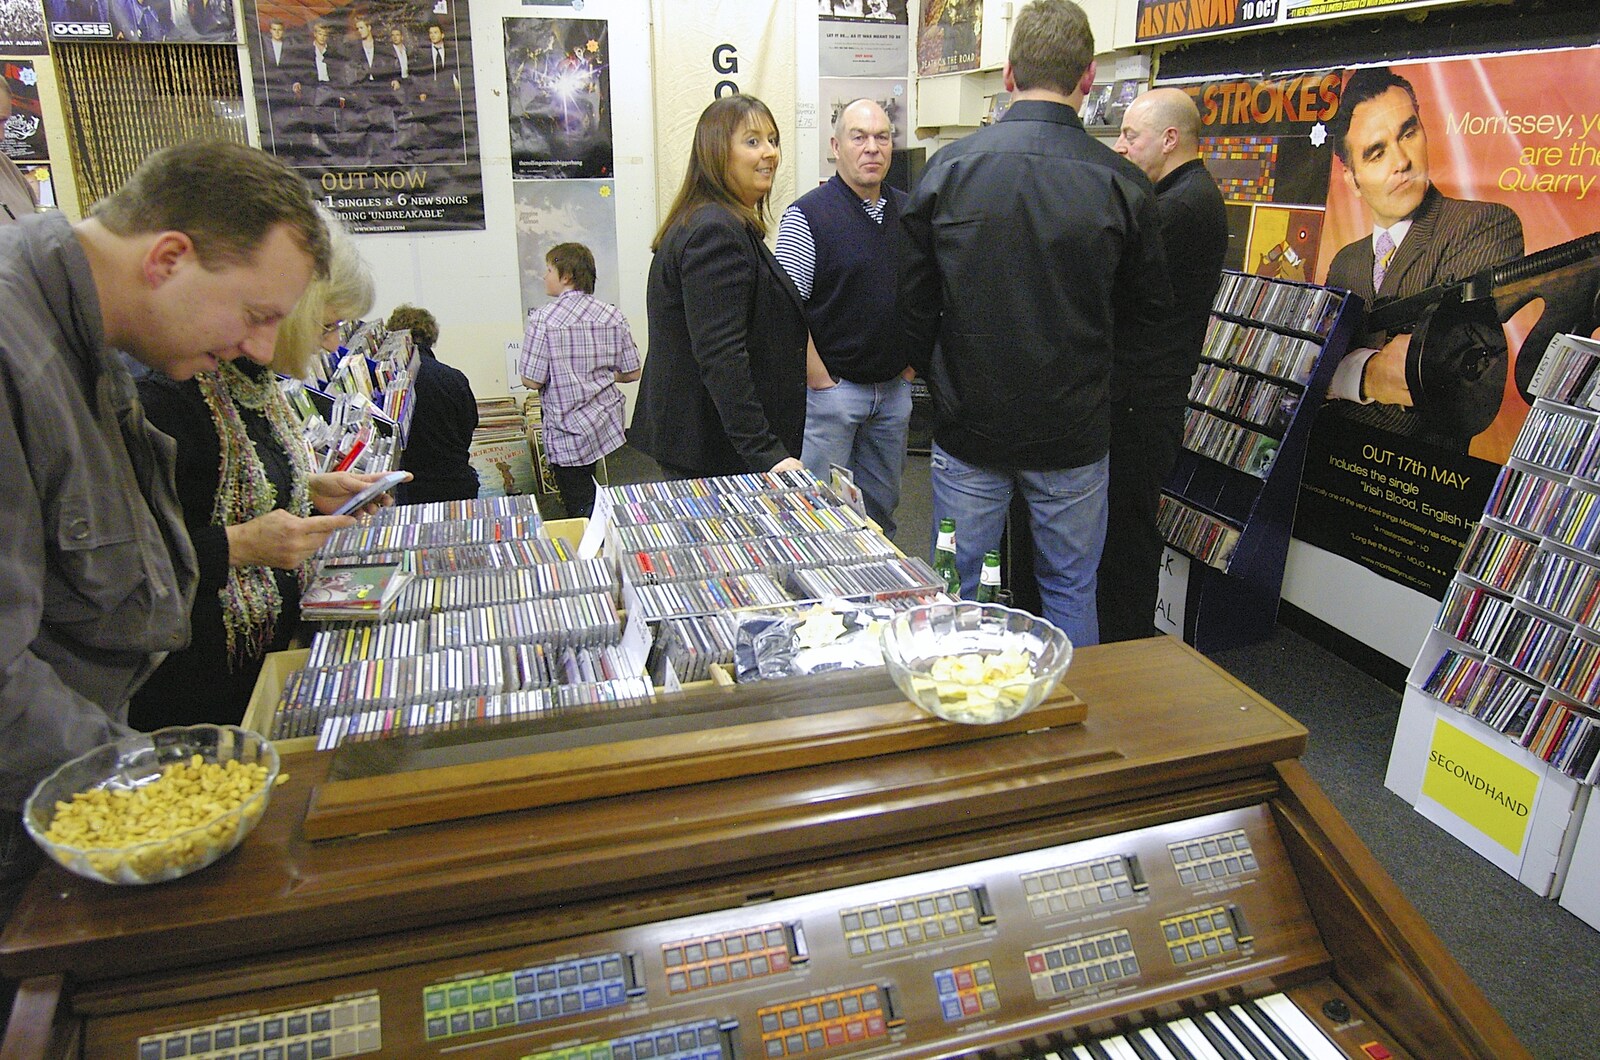 Closing Down: Viva La Revolution Records, Diss, Norfolk - 21st January 2006: A view over the organ